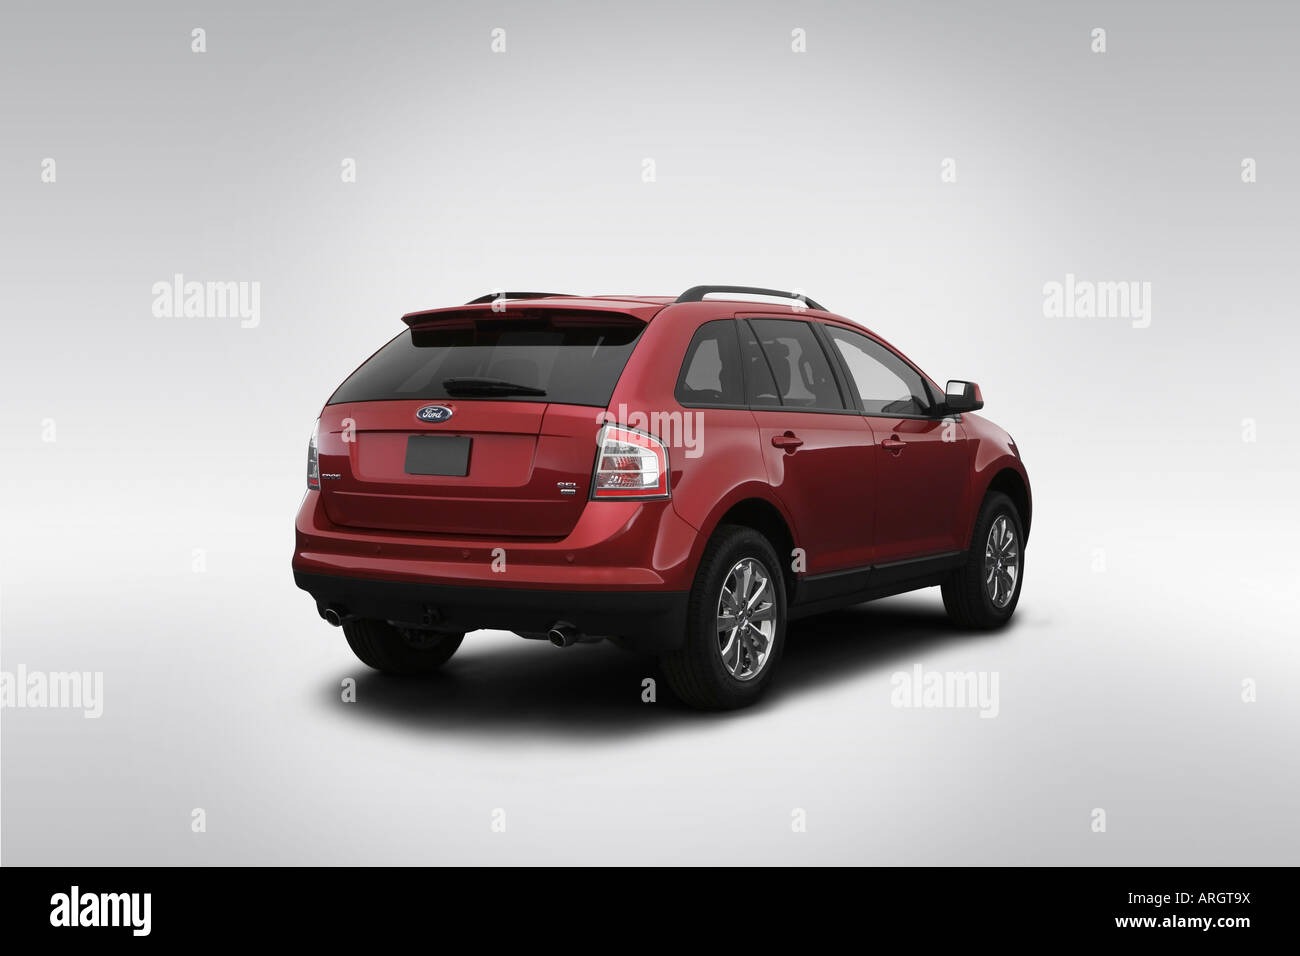 2007 Ford Edge SEL Plus in Red - Rear angle view Stock Photo - Alamy